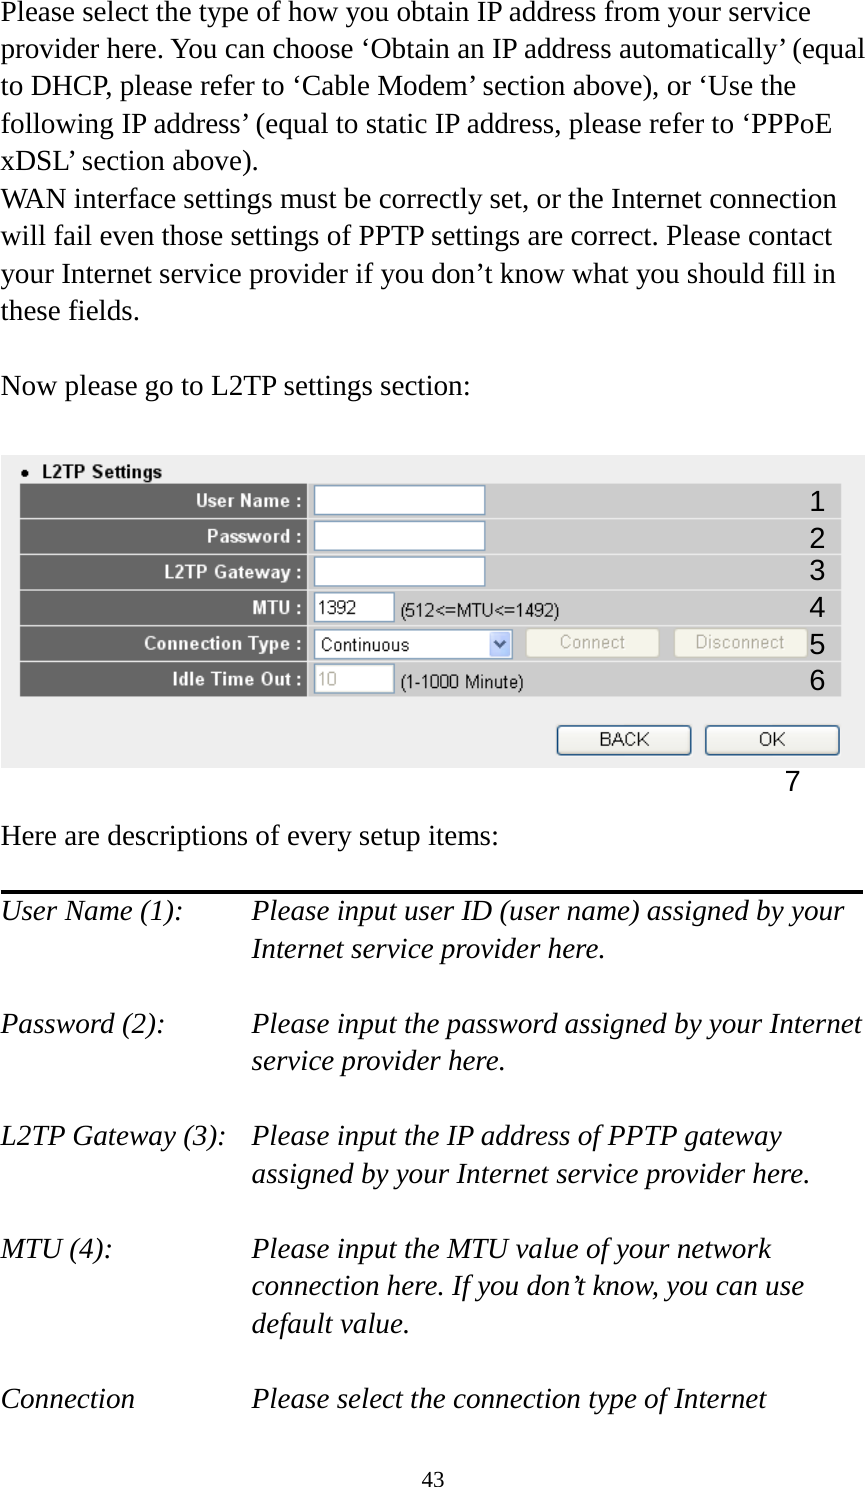 43 Please select the type of how you obtain IP address from your service provider here. You can choose ‘Obtain an IP address automatically’ (equal to DHCP, please refer to ‘Cable Modem’ section above), or ‘Use the following IP address’ (equal to static IP address, please refer to ‘PPPoE xDSL’ section above).   WAN interface settings must be correctly set, or the Internet connection will fail even those settings of PPTP settings are correct. Please contact your Internet service provider if you don’t know what you should fill in these fields.  Now please go to L2TP settings section:    Here are descriptions of every setup items:  User Name (1):     Please input user ID (user name) assigned by your      Internet service provider here.  Password (2):   Please input the password assigned by your Internet service provider here.  L2TP Gateway (3):   Please input the IP address of PPTP gateway assigned by your Internet service provider here.  MTU (4):    Please input the MTU value of your network connection here. If you don’t know, you can use default value.  Connection       Please select the connection type of Internet 1 2 4 3 5 7 6 